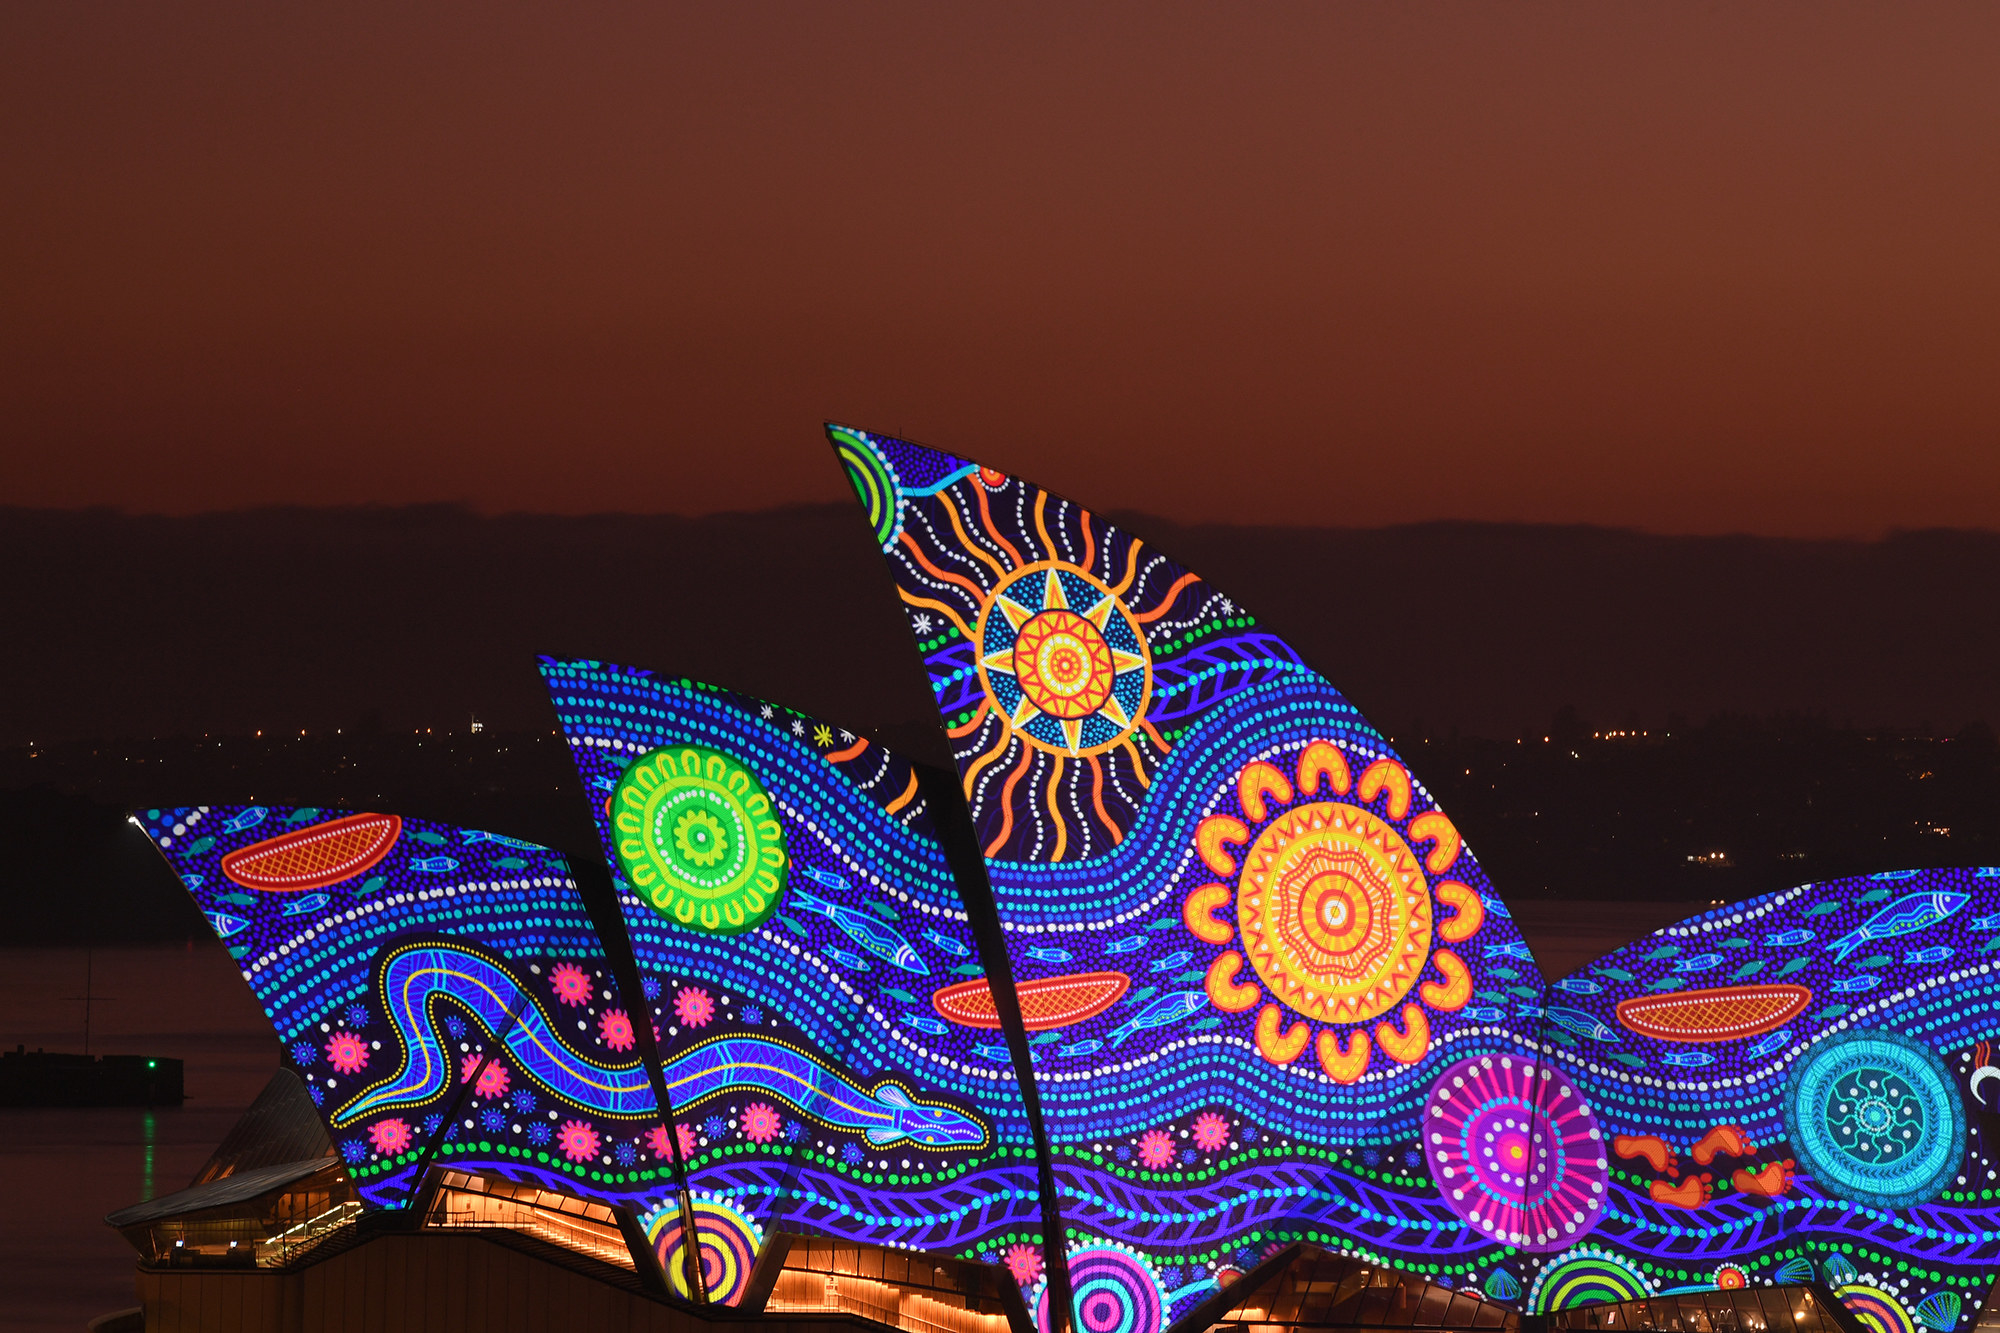 brightly colored art decorates the sydney opera house at night